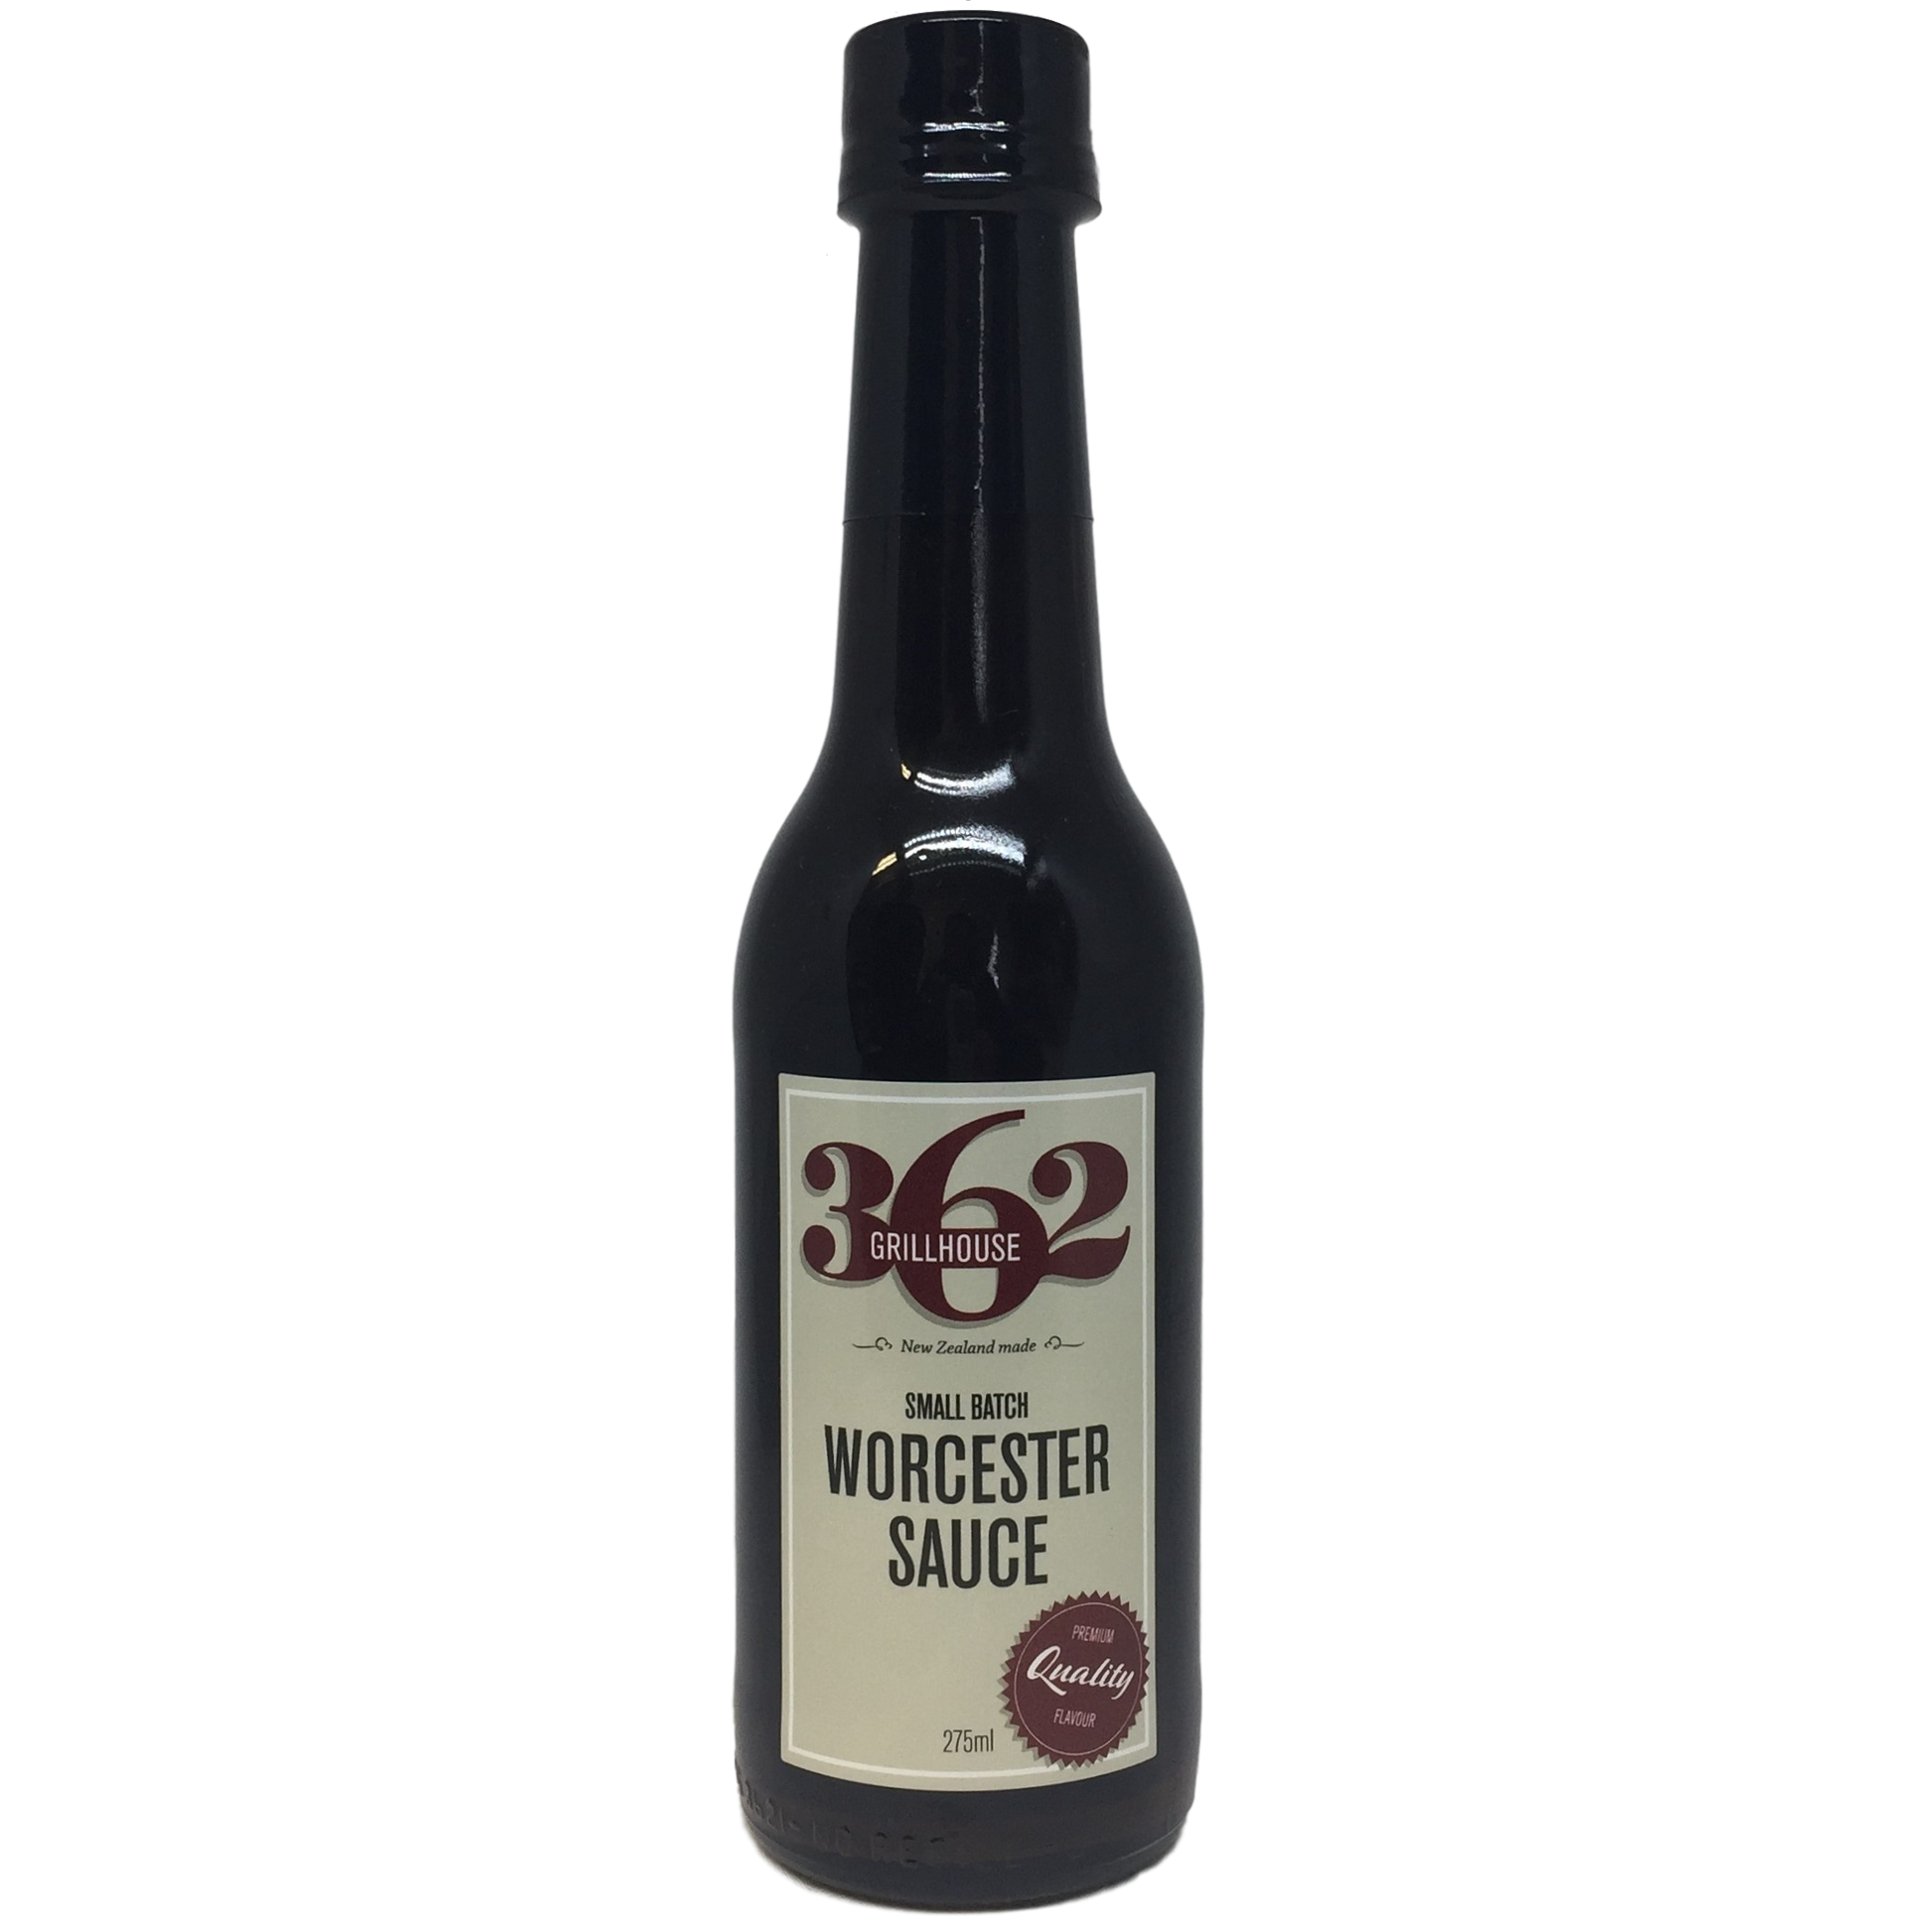 362 Grillhouse - Small Batch Worcester Sauce